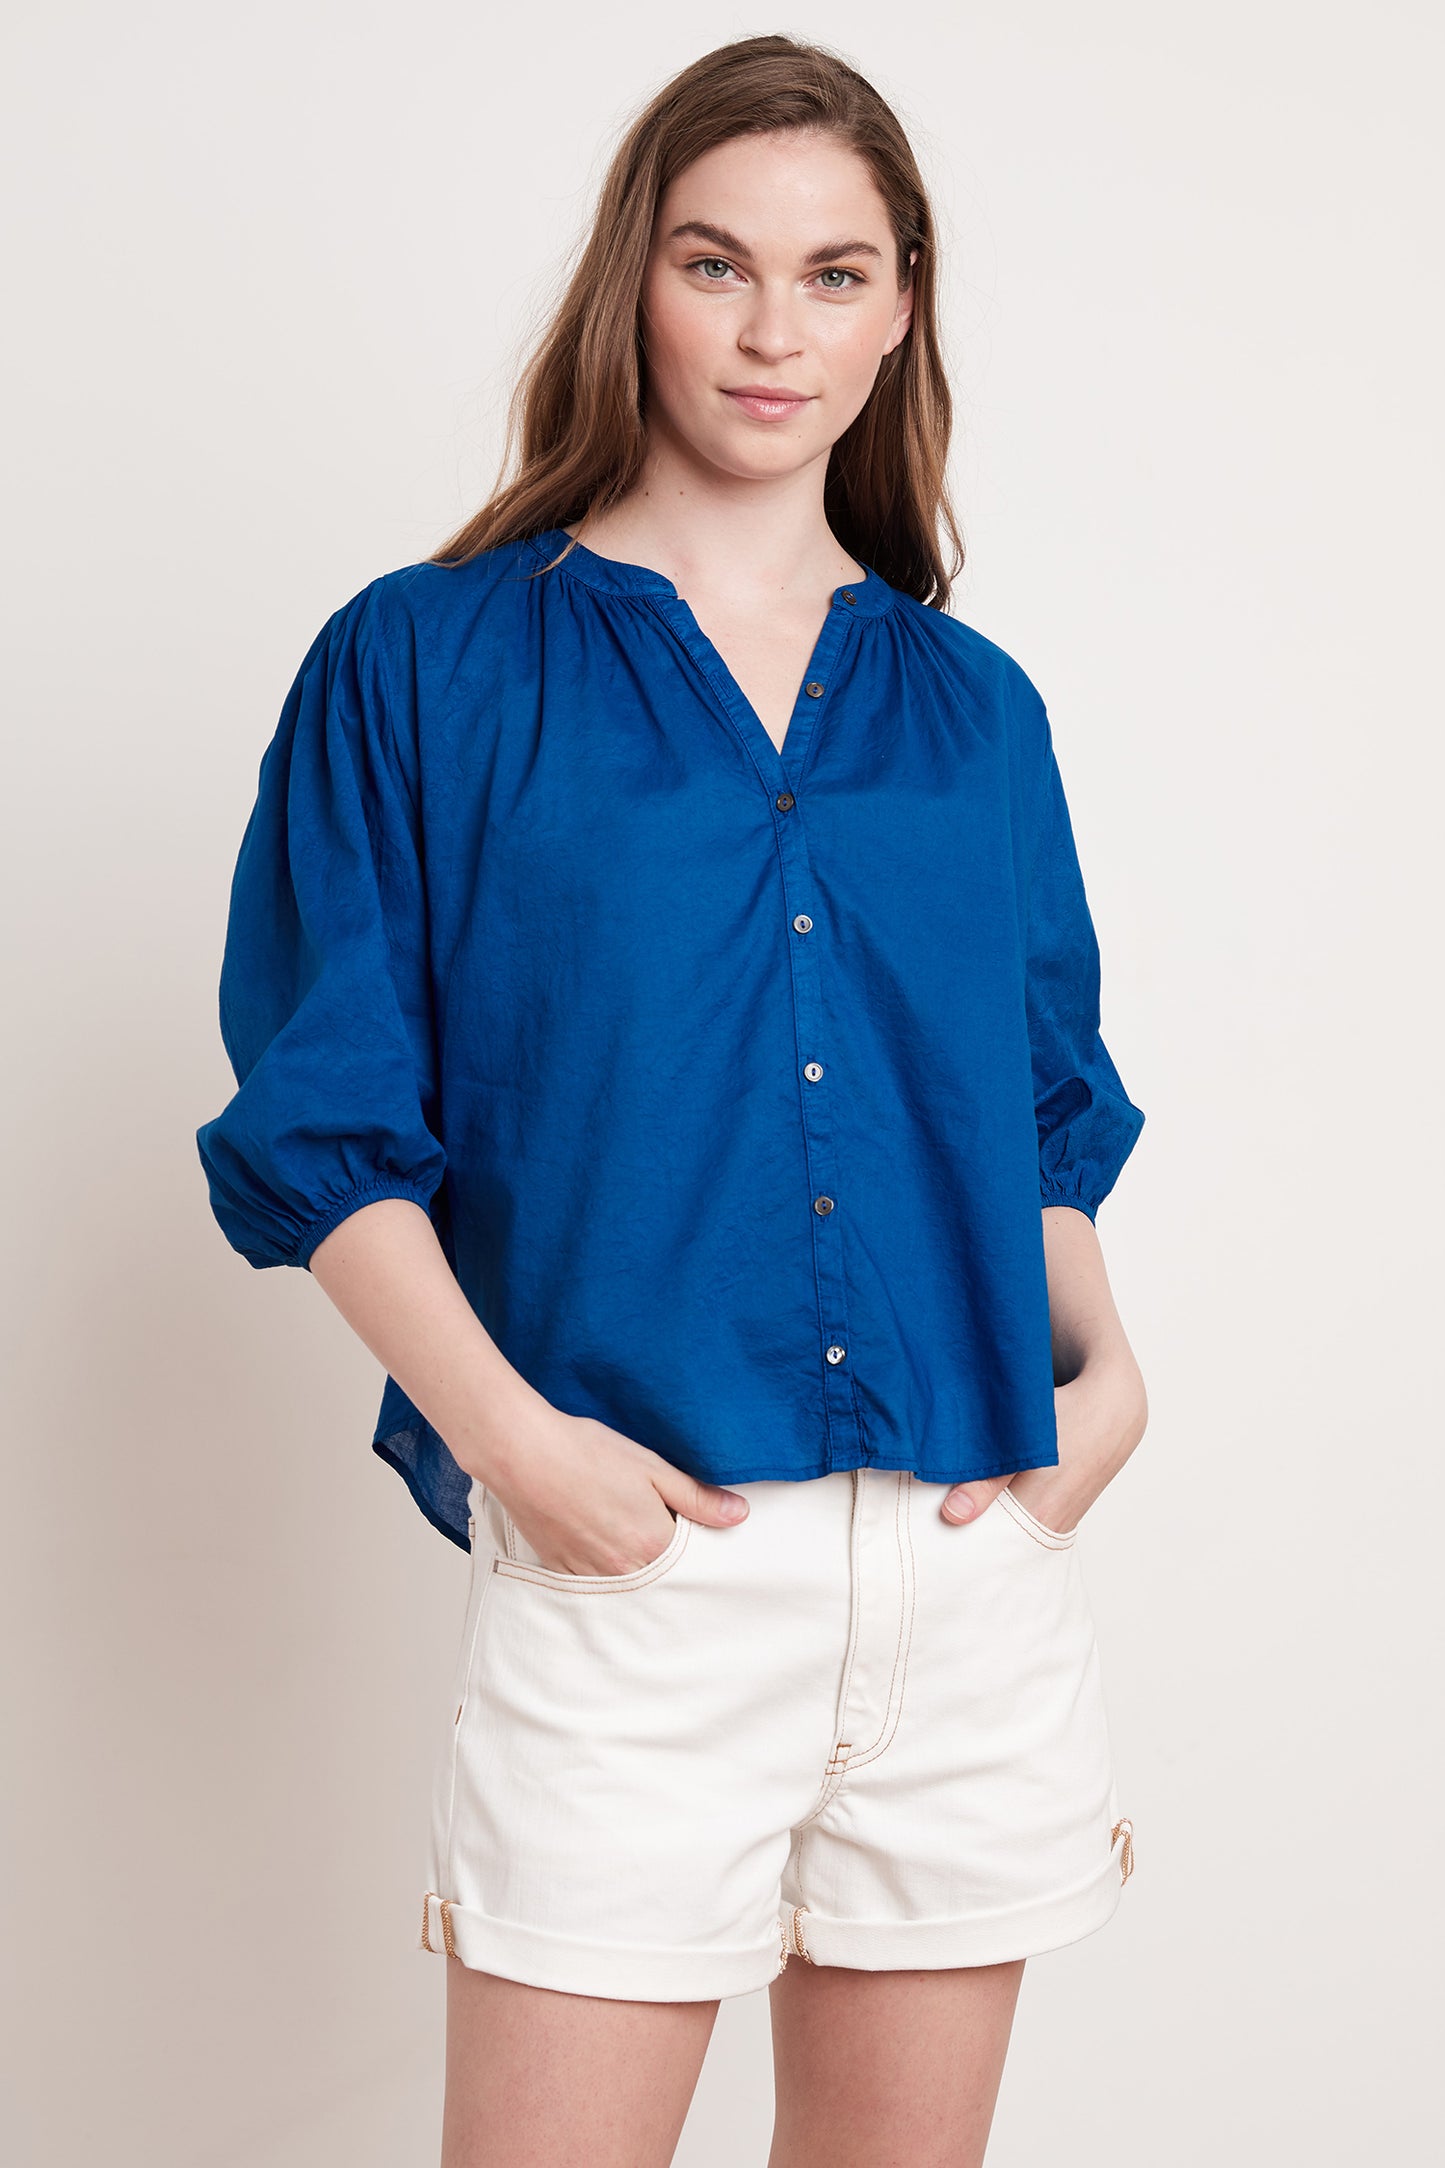 EMBERLY COTTON VOILE TOP IN PATRIOT